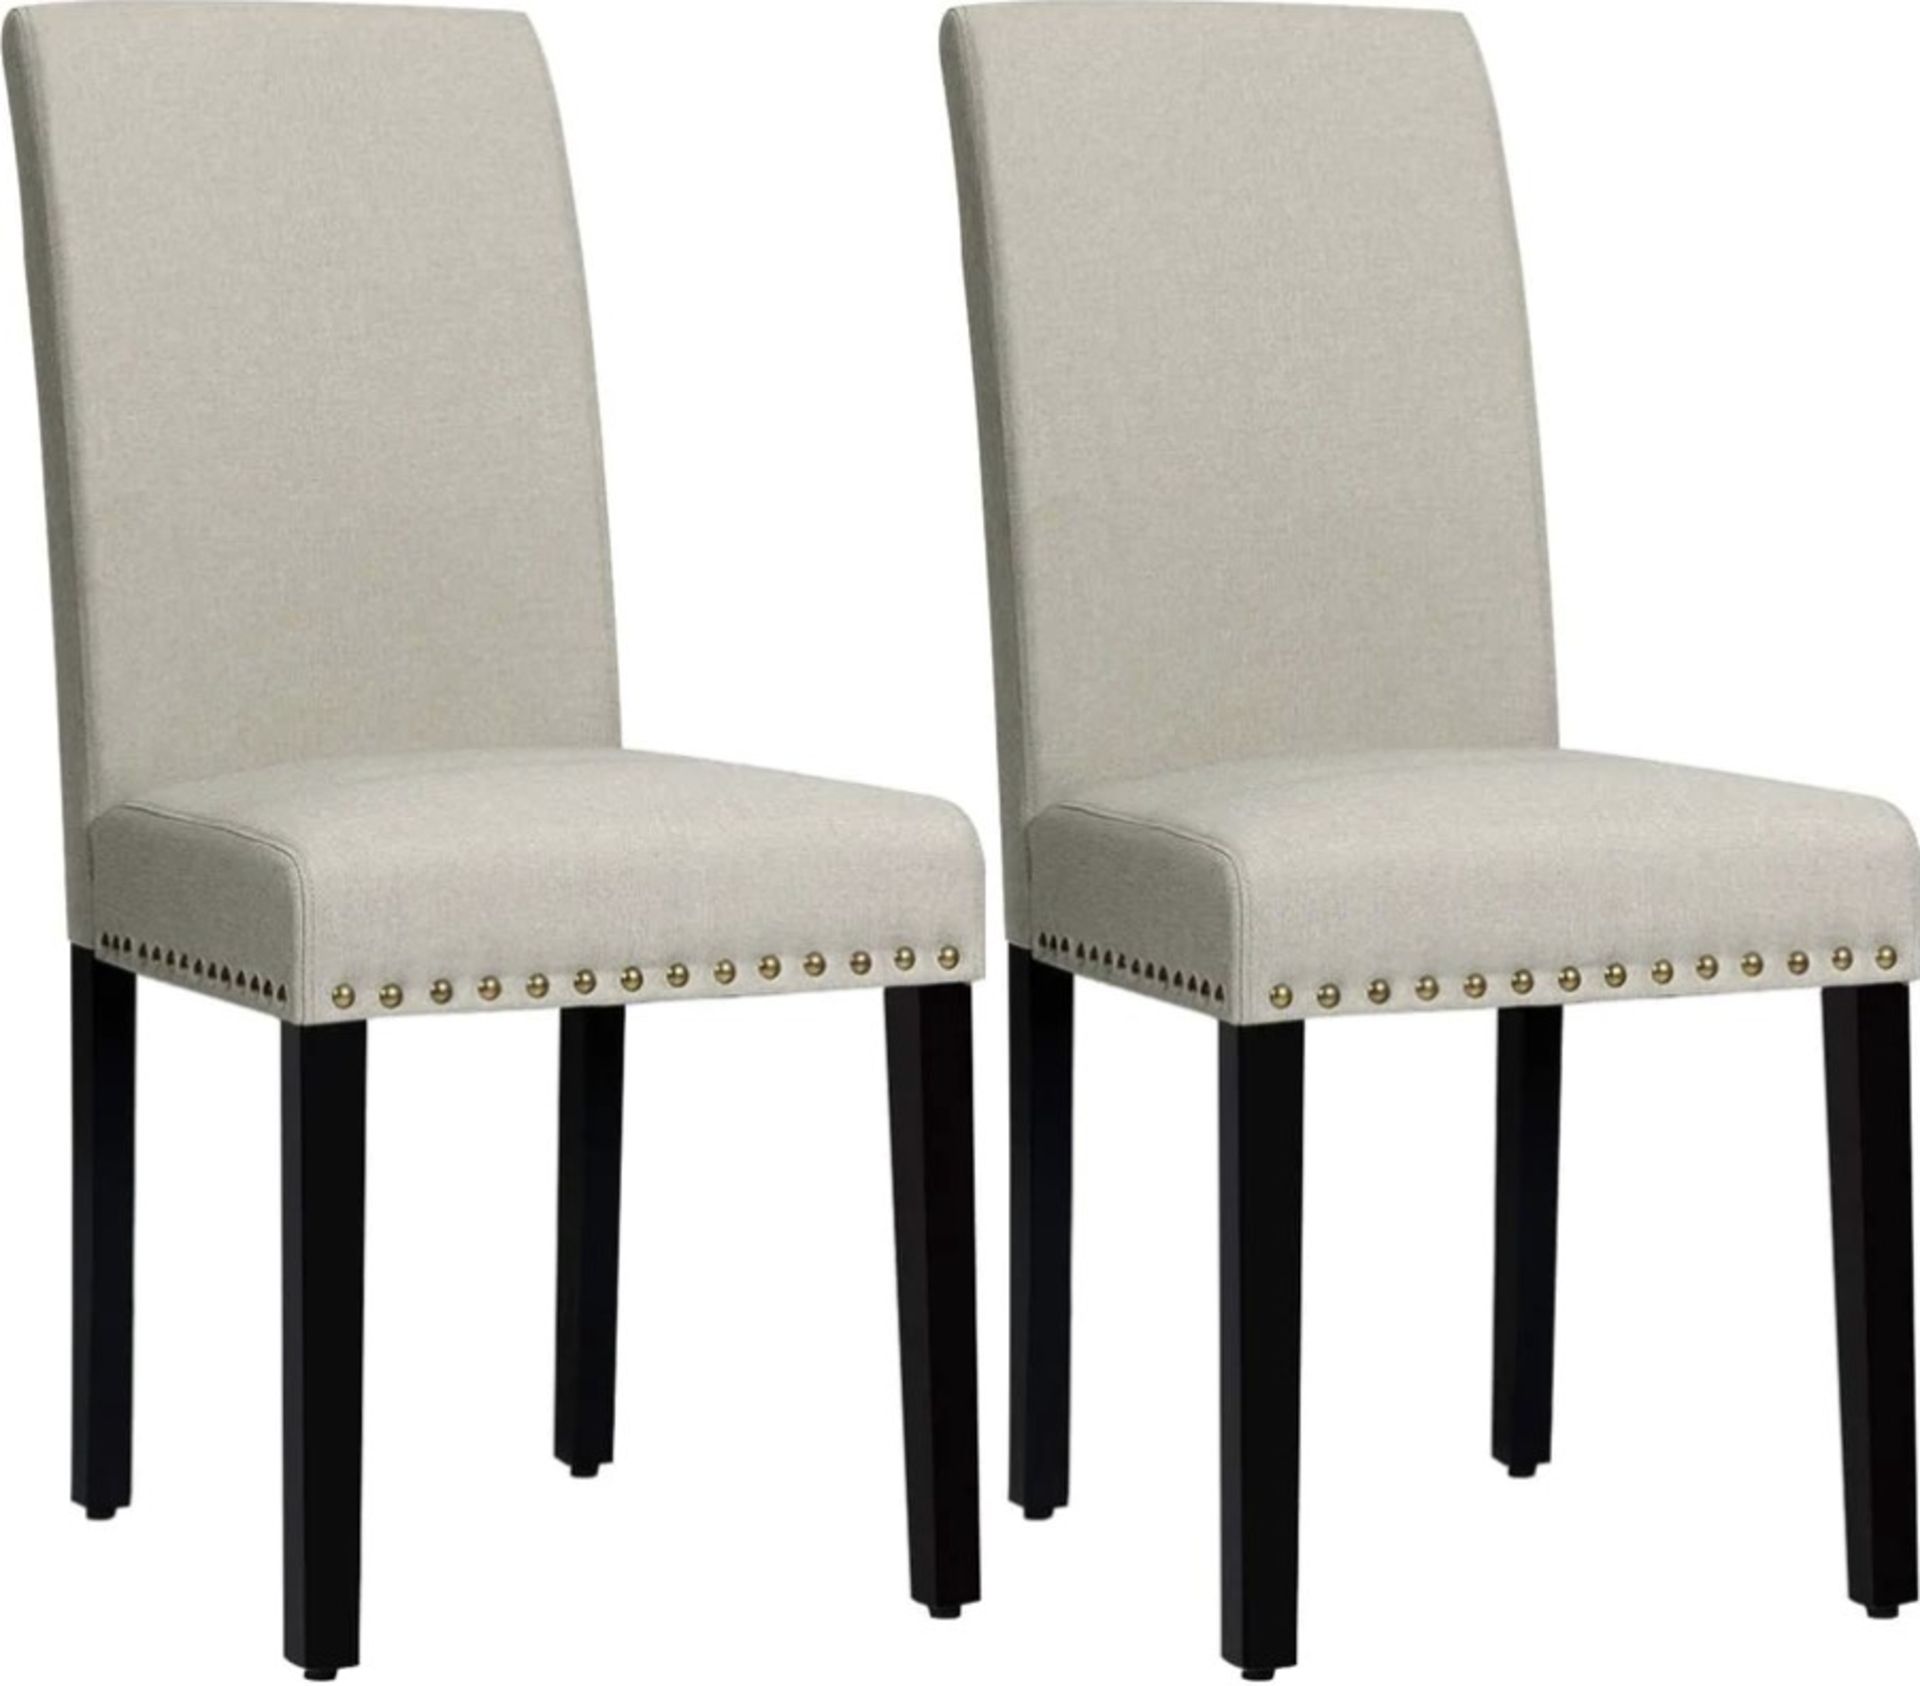 Set Of 2 Upholstered Dining Chairs With Rubber Wood Legs-Beige RRP £83.98 (LOCATION - H/S 5.1.2)